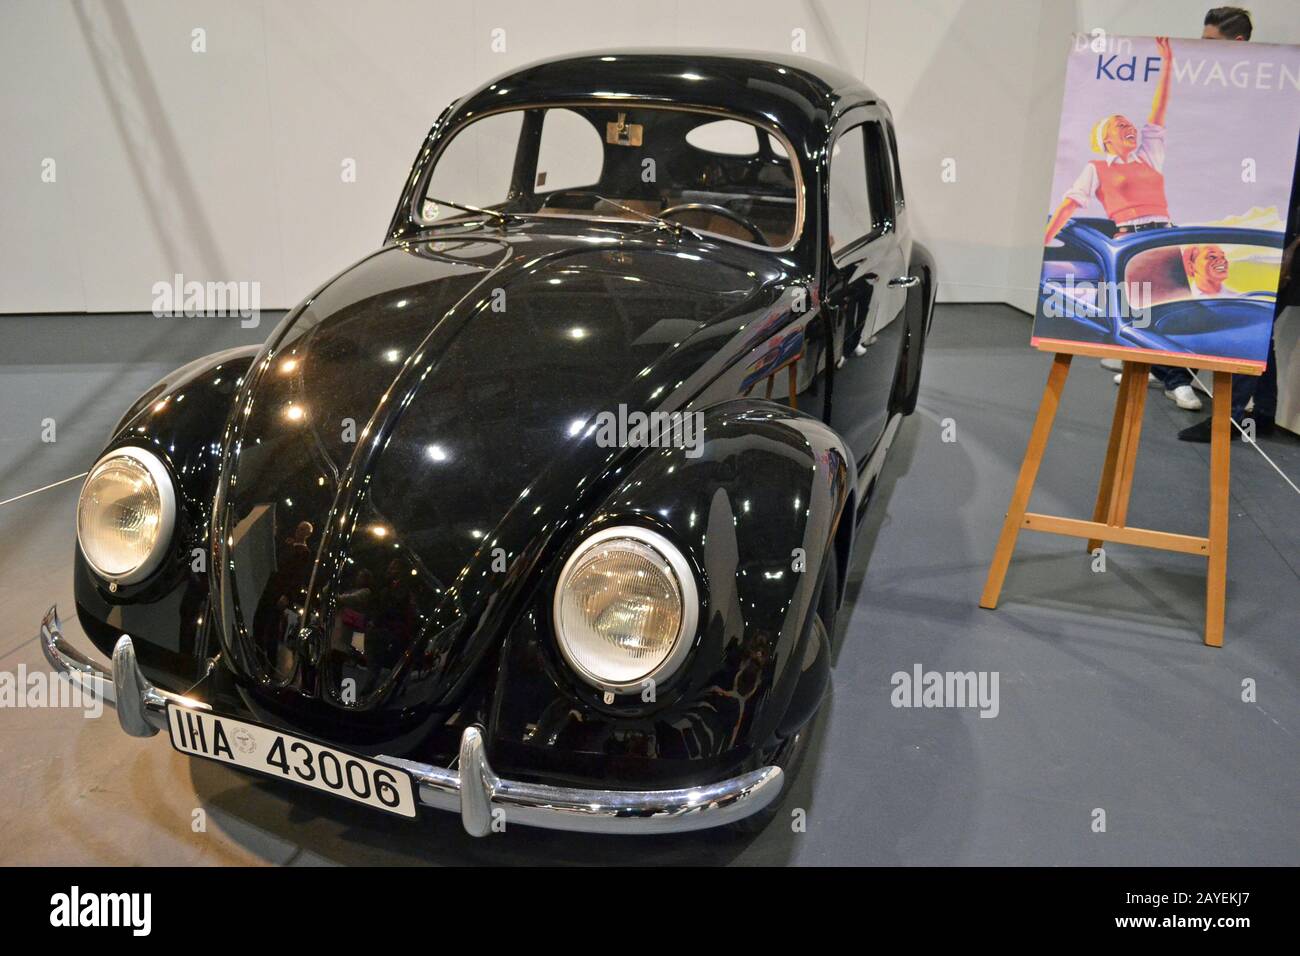 1938 KdF Wagen Prototype eg Volkswagen VW Beetle in James May's Cars that  Changed the World exhibition, at the London Classic Car Show, England, UK  Stock Photo - Alamy